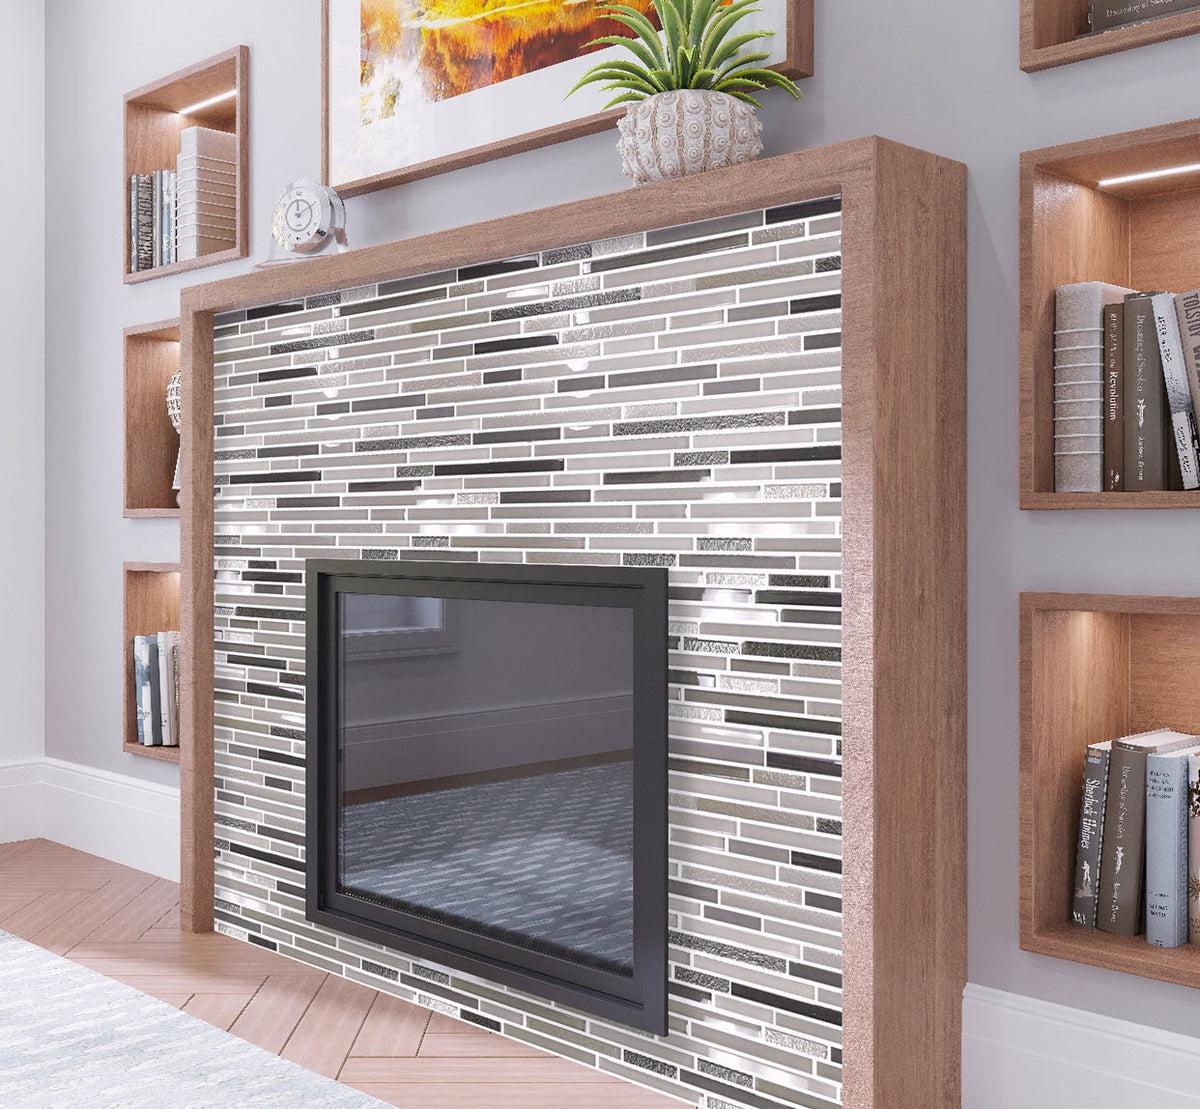 Gray and silver stacked glass tile for a modern fireplace surround